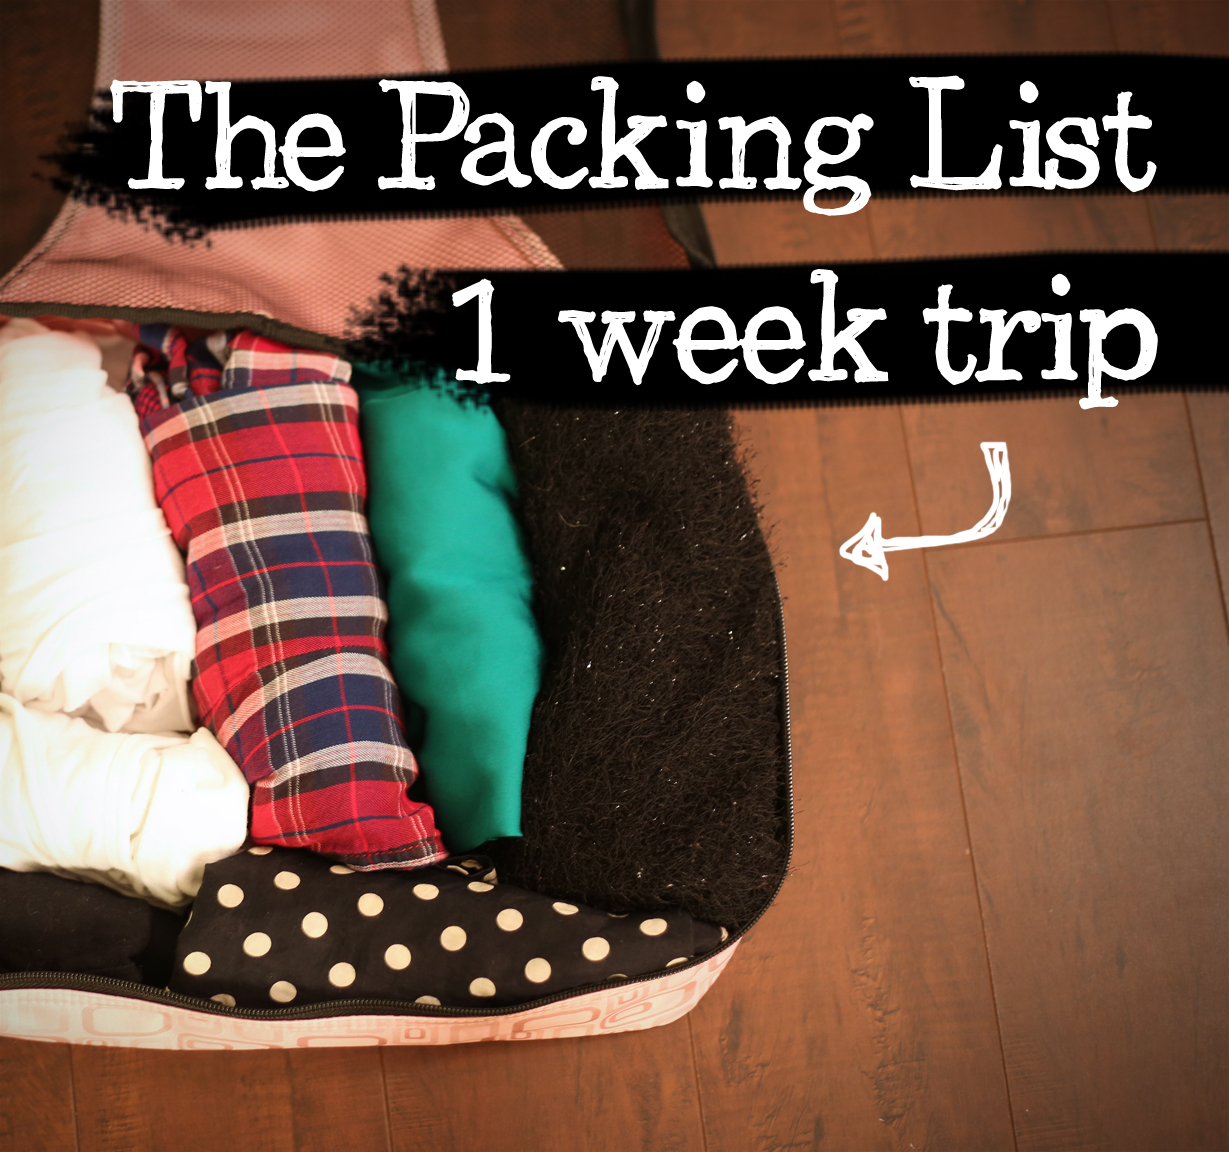 Day 17: The Essential Toiletries Kit - Her Packing List